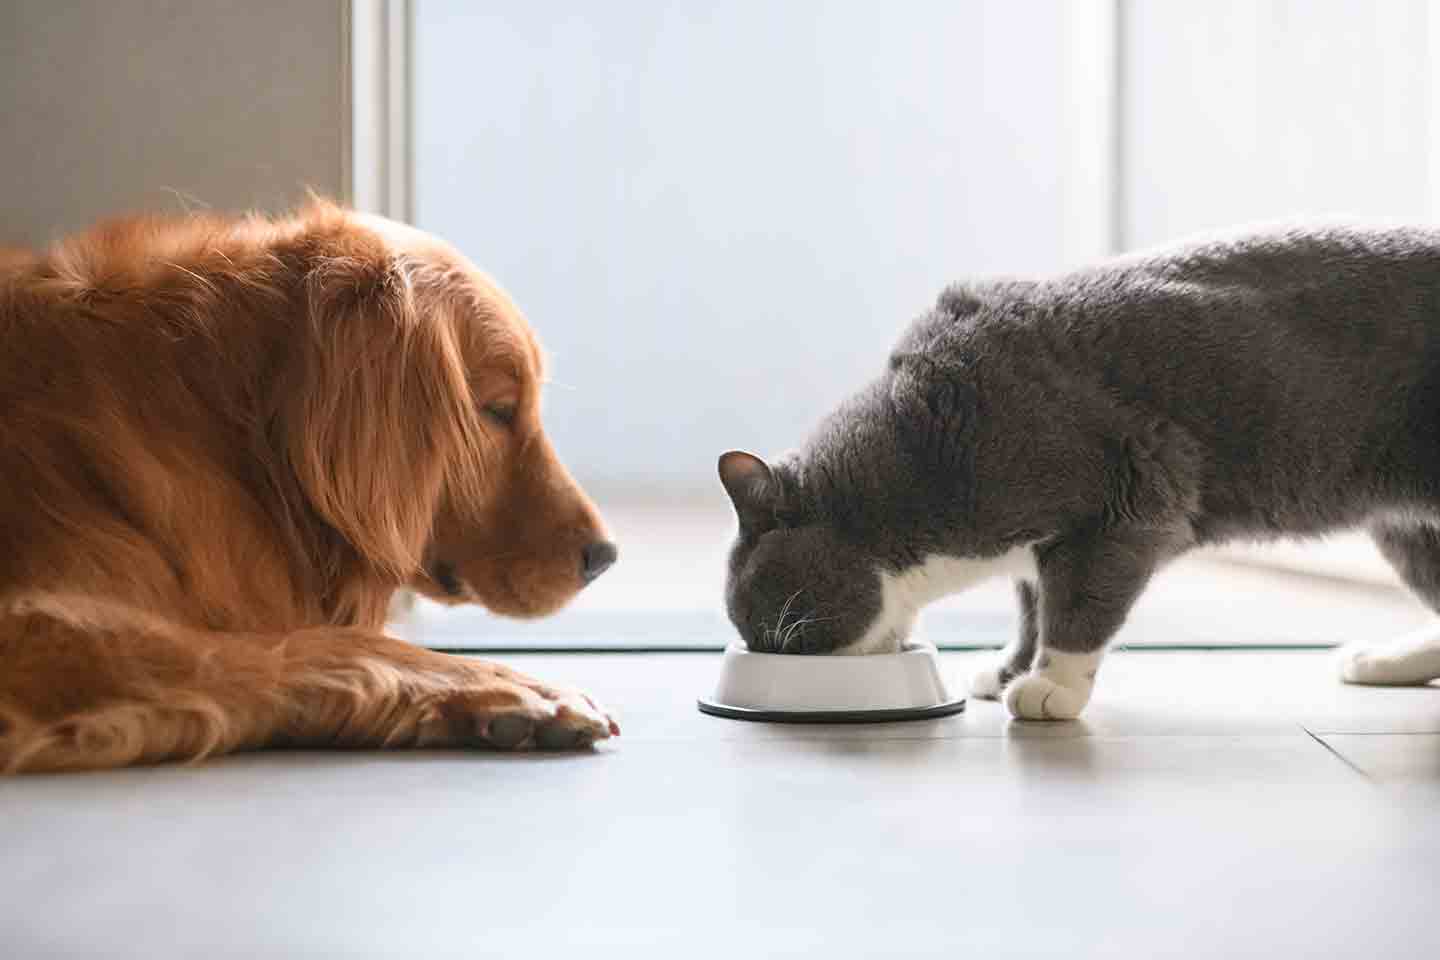 Photo of a dog watching a cat eat from a bowl.